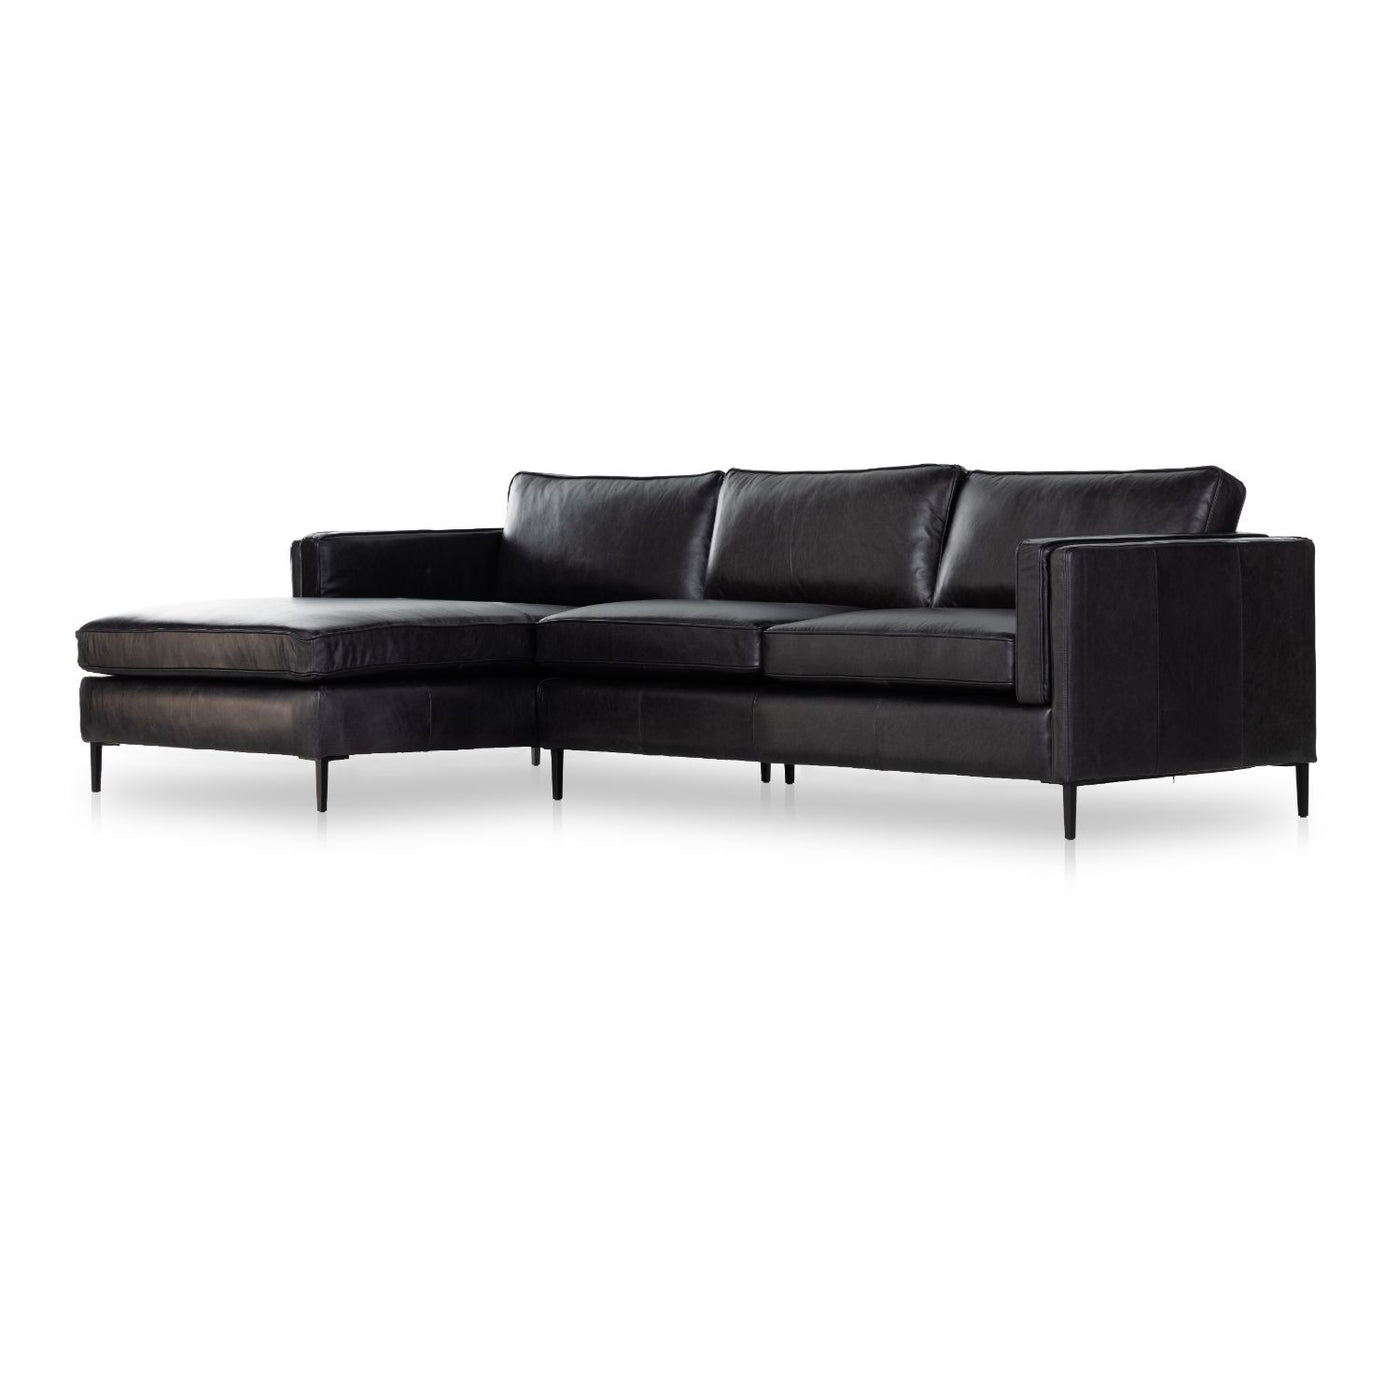 Emery 2pc Sectional